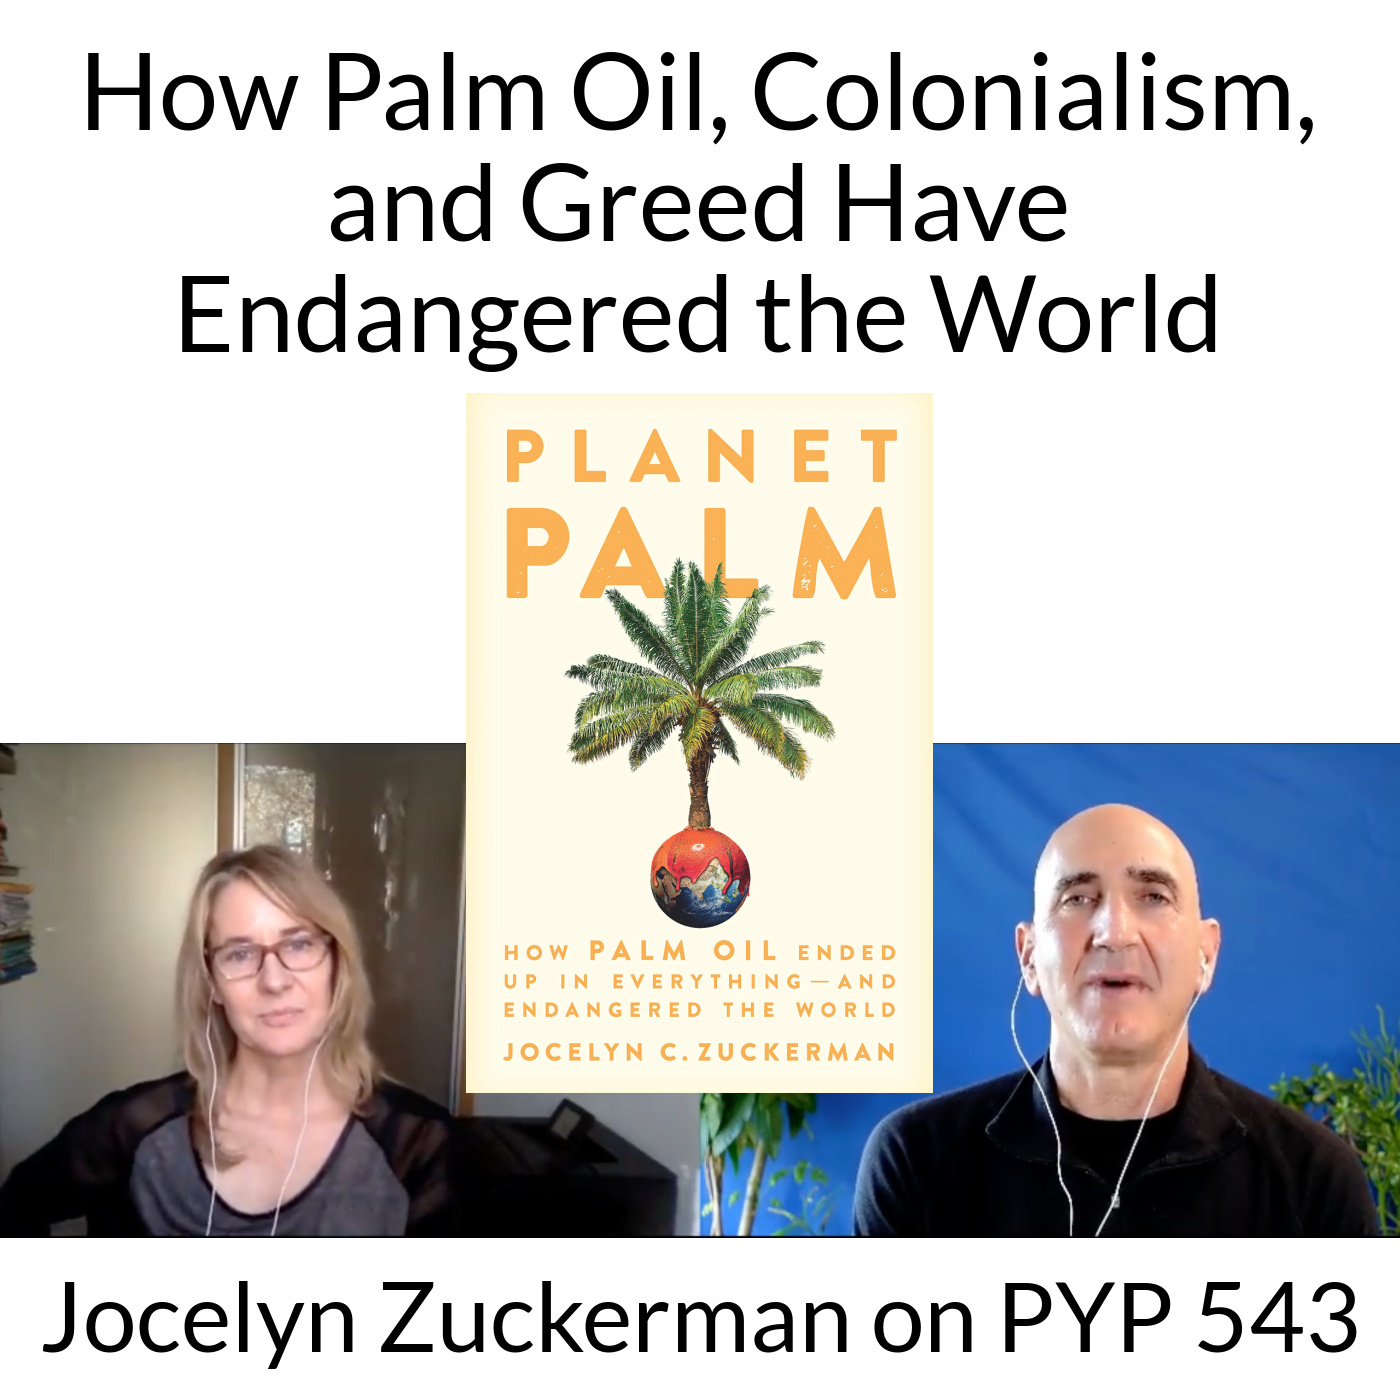 How Palm Oil, Colonialism, and Greed Have Endangered the World: Jocelyn Zuckerman on PYP 543